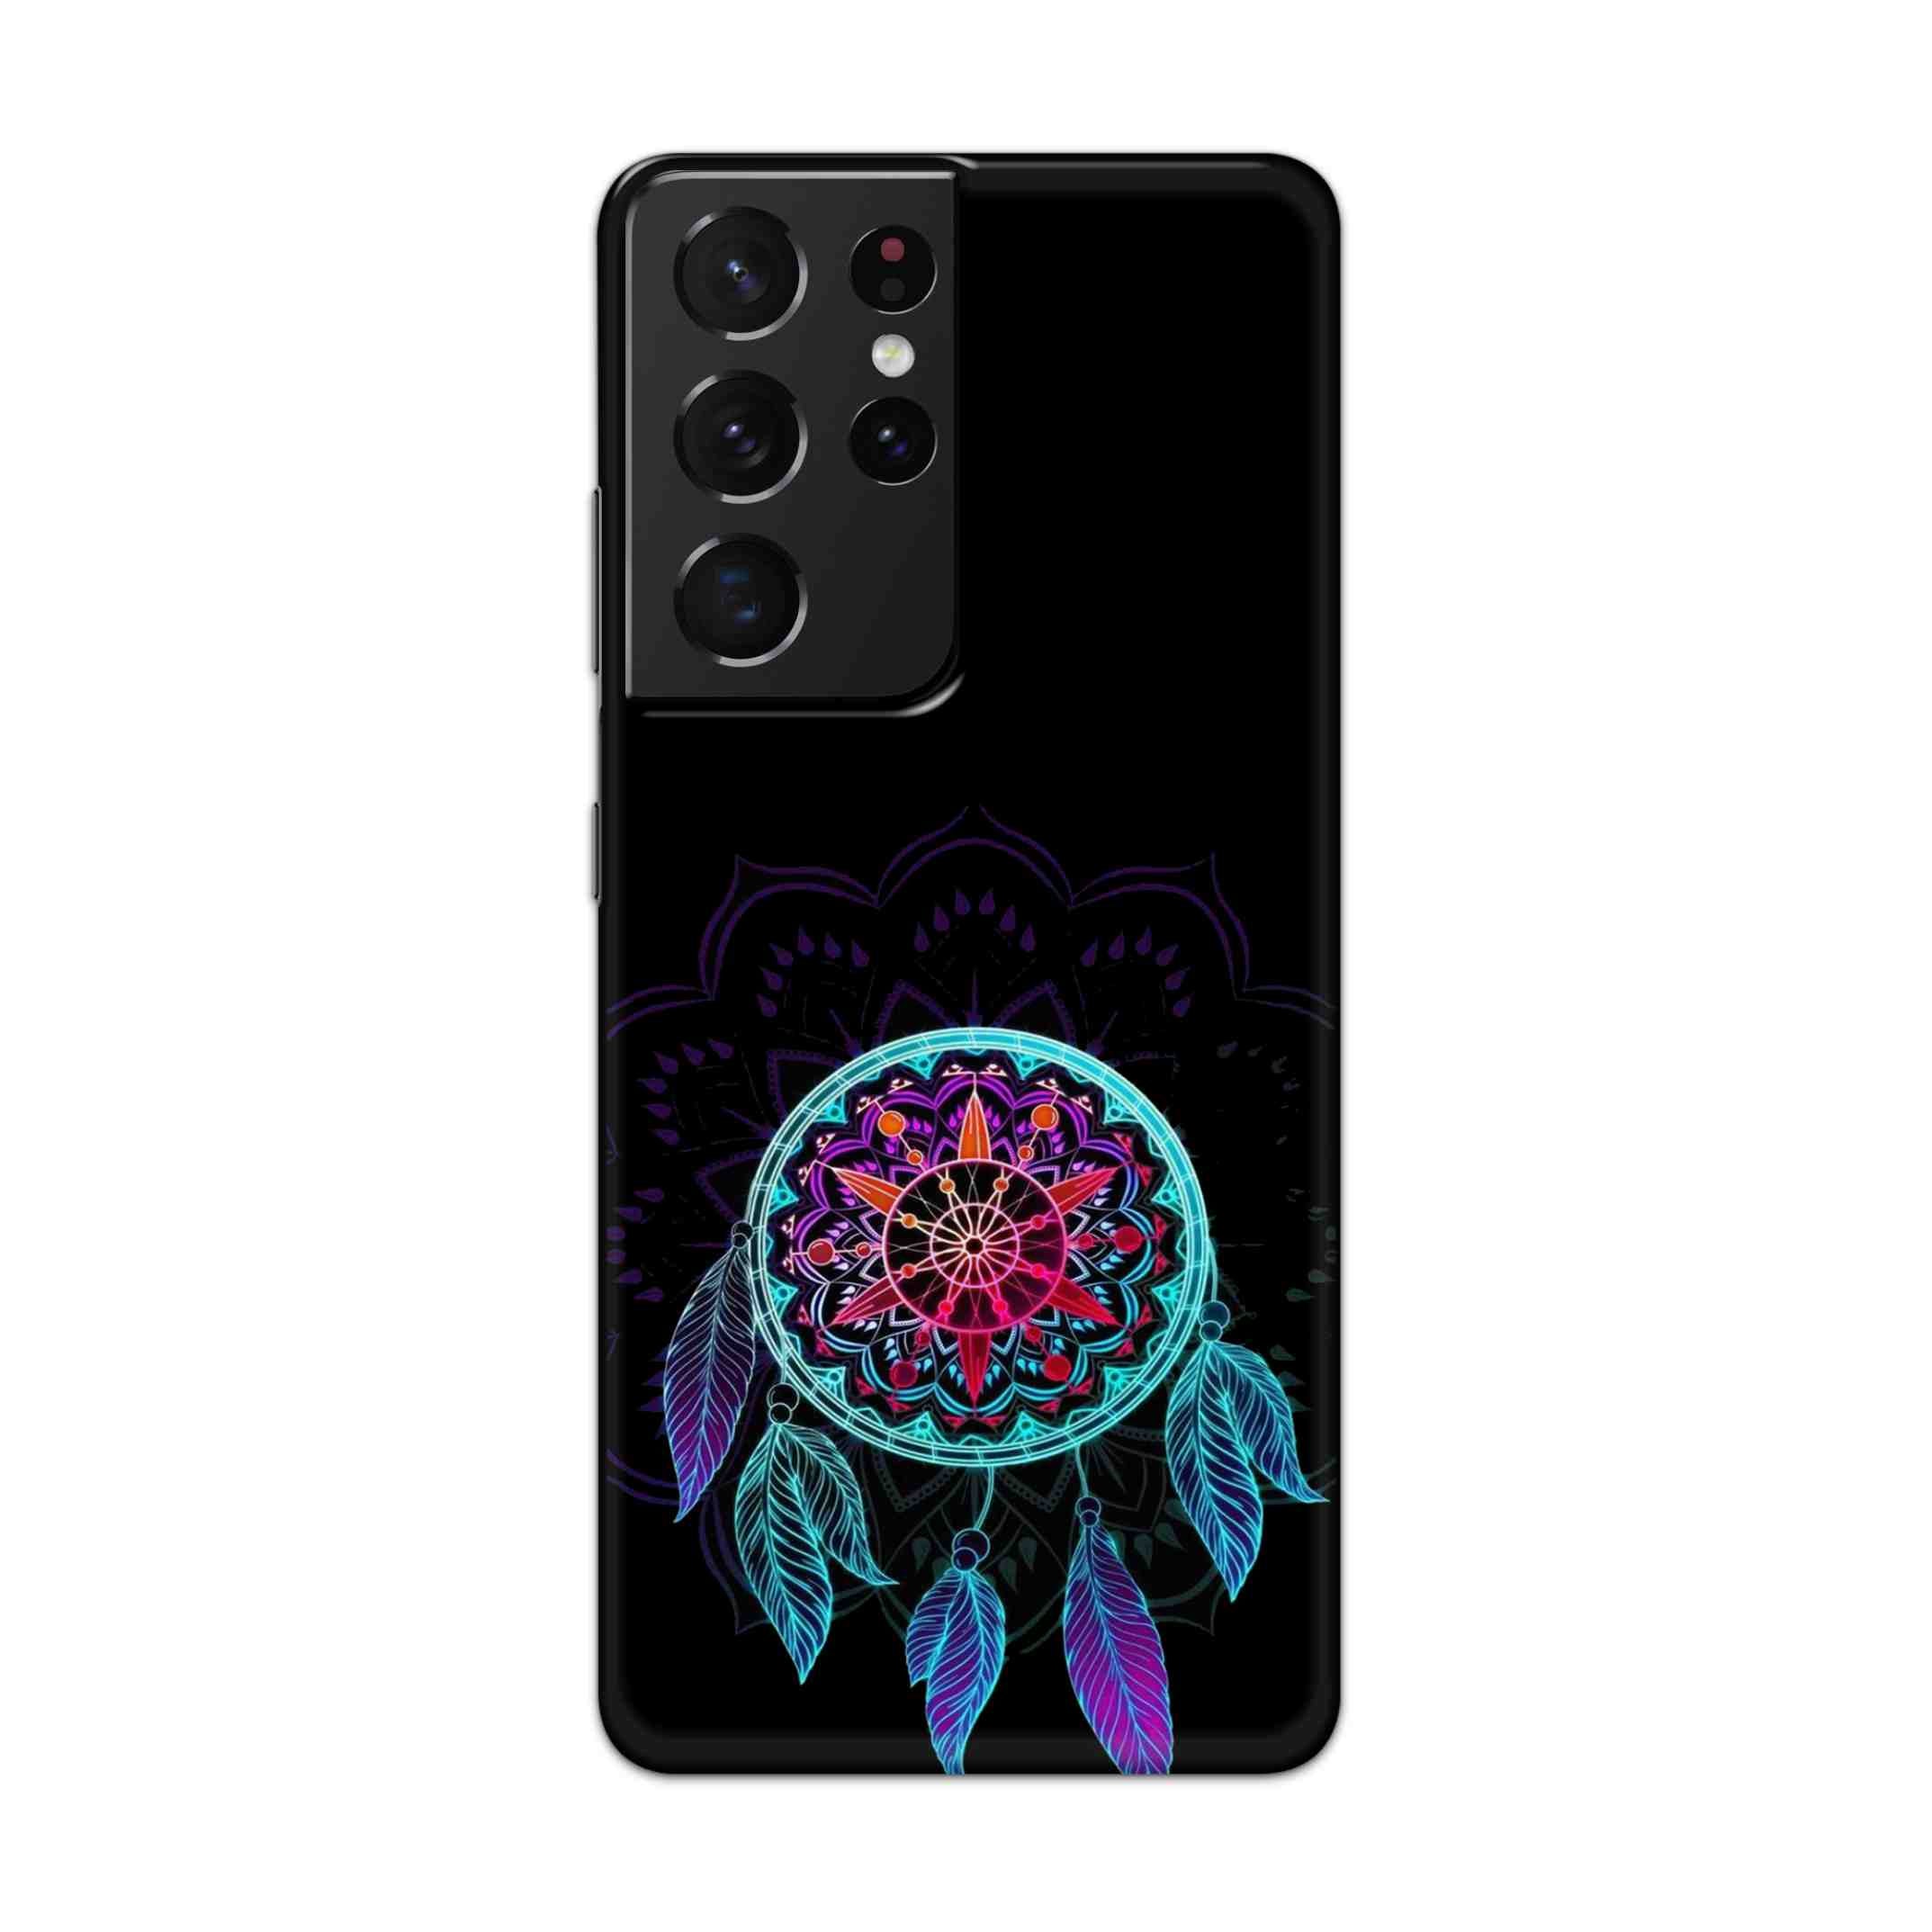 Buy Dream Catcher Hard Back Mobile Phone Case Cover For Samsung Galaxy S21 Ultra Online